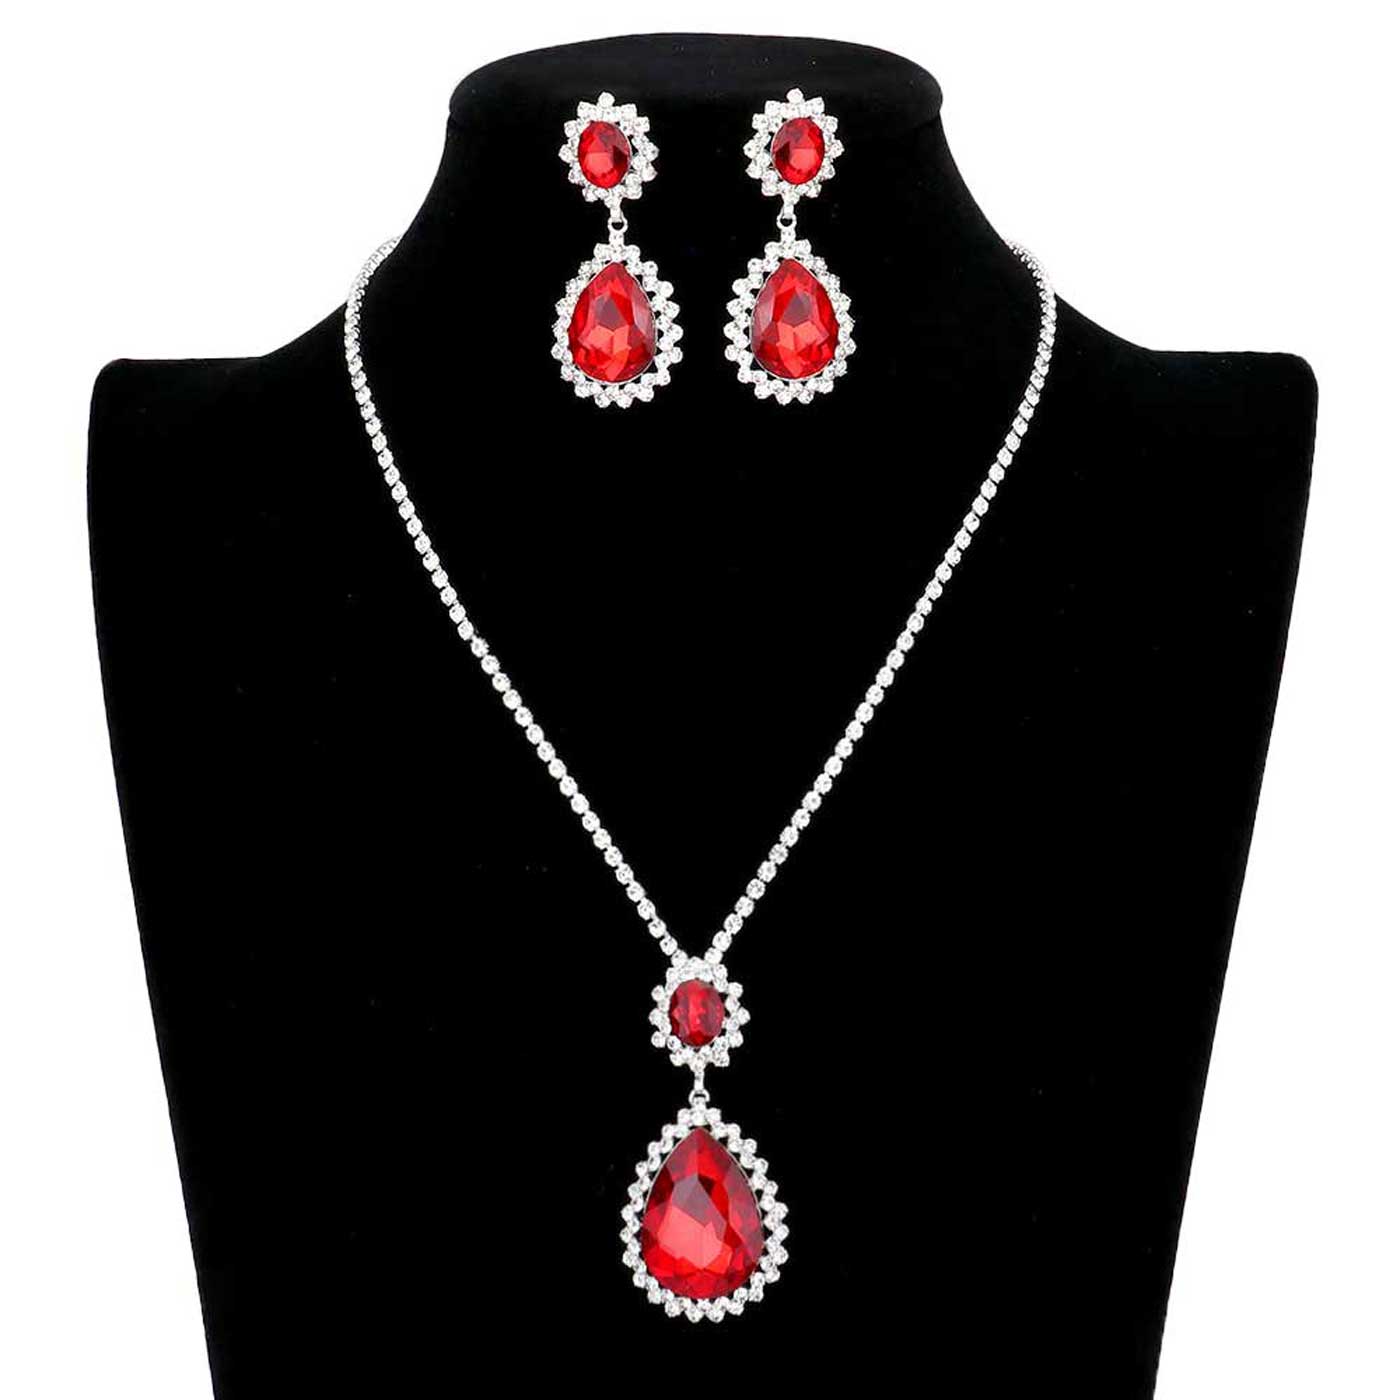 Red Teardrop Accented Rhinestone Necklace. These gorgeous rhinestone pieces will show your class in any special occasion. The elegance of these rhinestone goes unmatched, great for wearing at a party! Perfect jewelry to enhance your look. Awesome gift for birthday, Anniversary, Valentine’s Day or any special occasion.